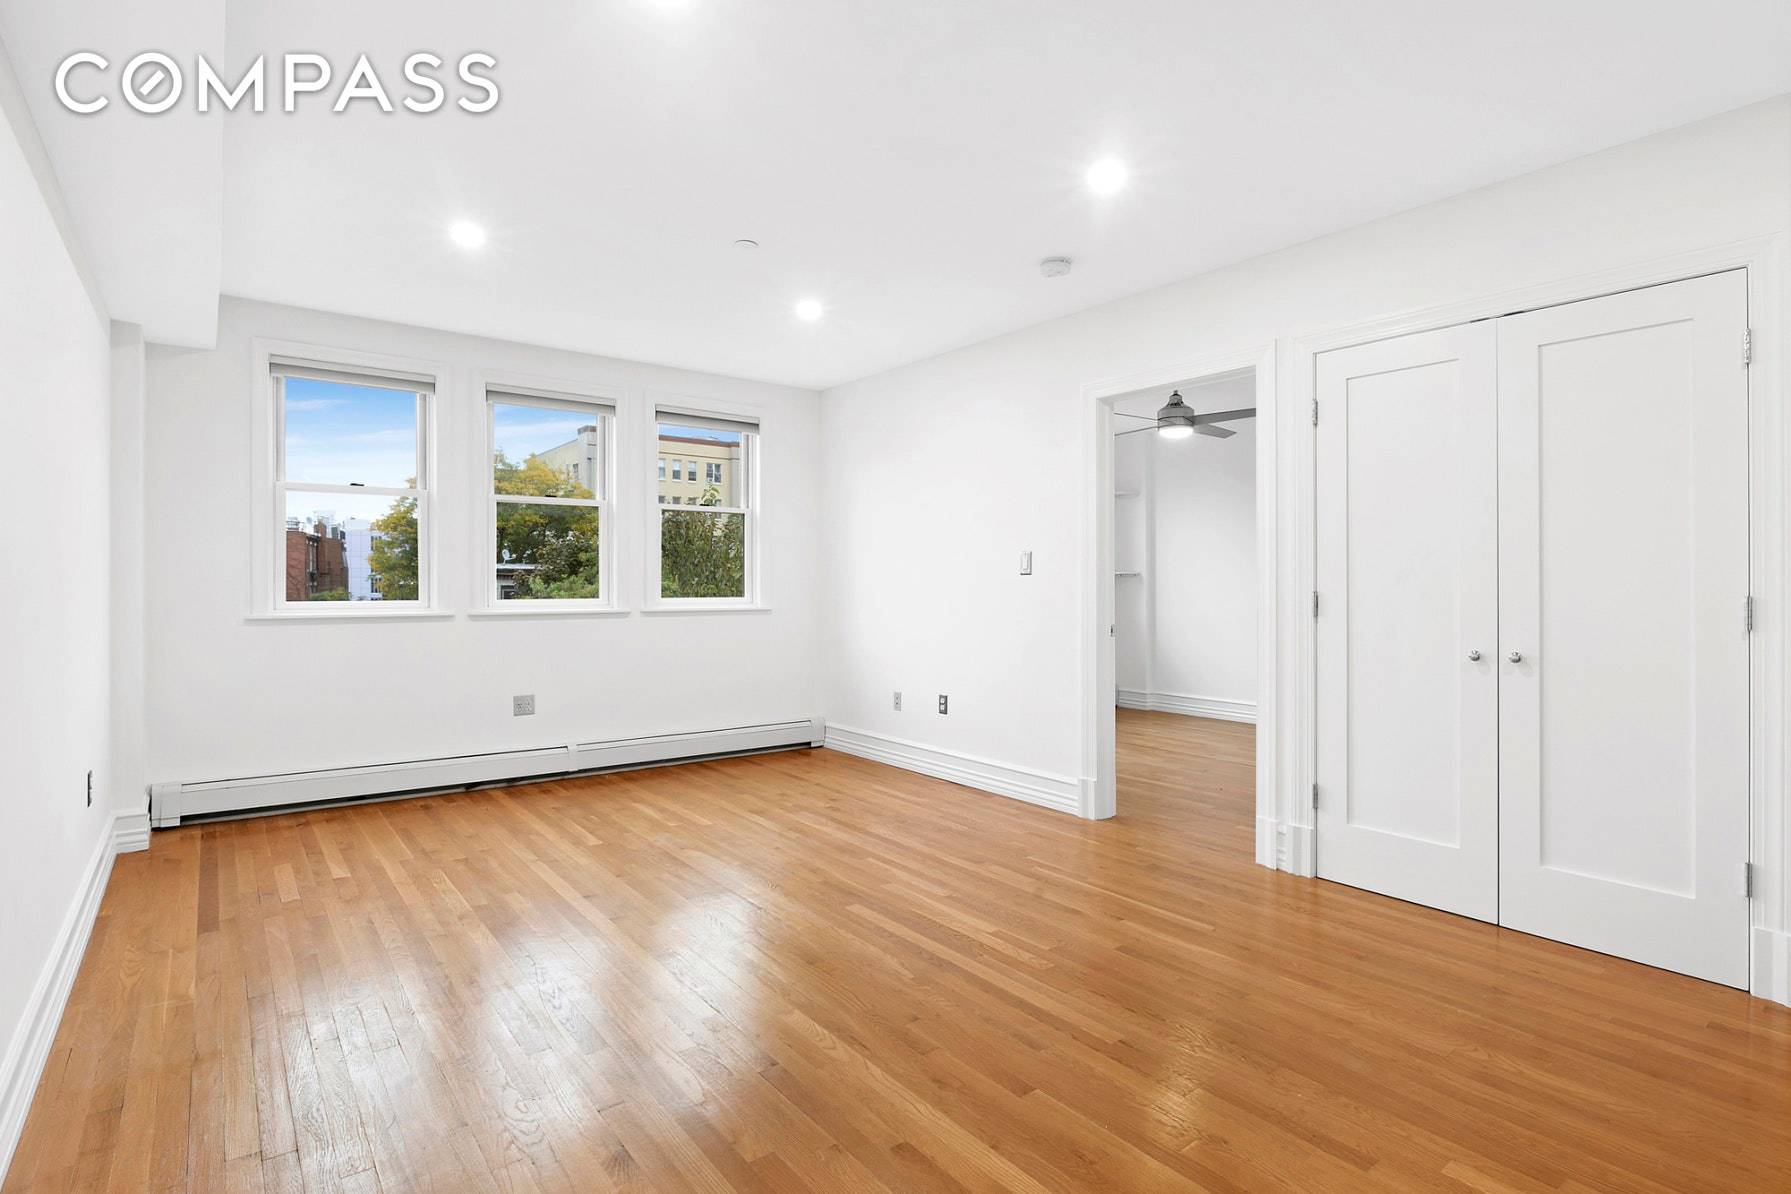 A spacious, bright, and renovated one bedroom home complete with a stackable washer dryer on a tree lined, brownstone block in Fort Greene.